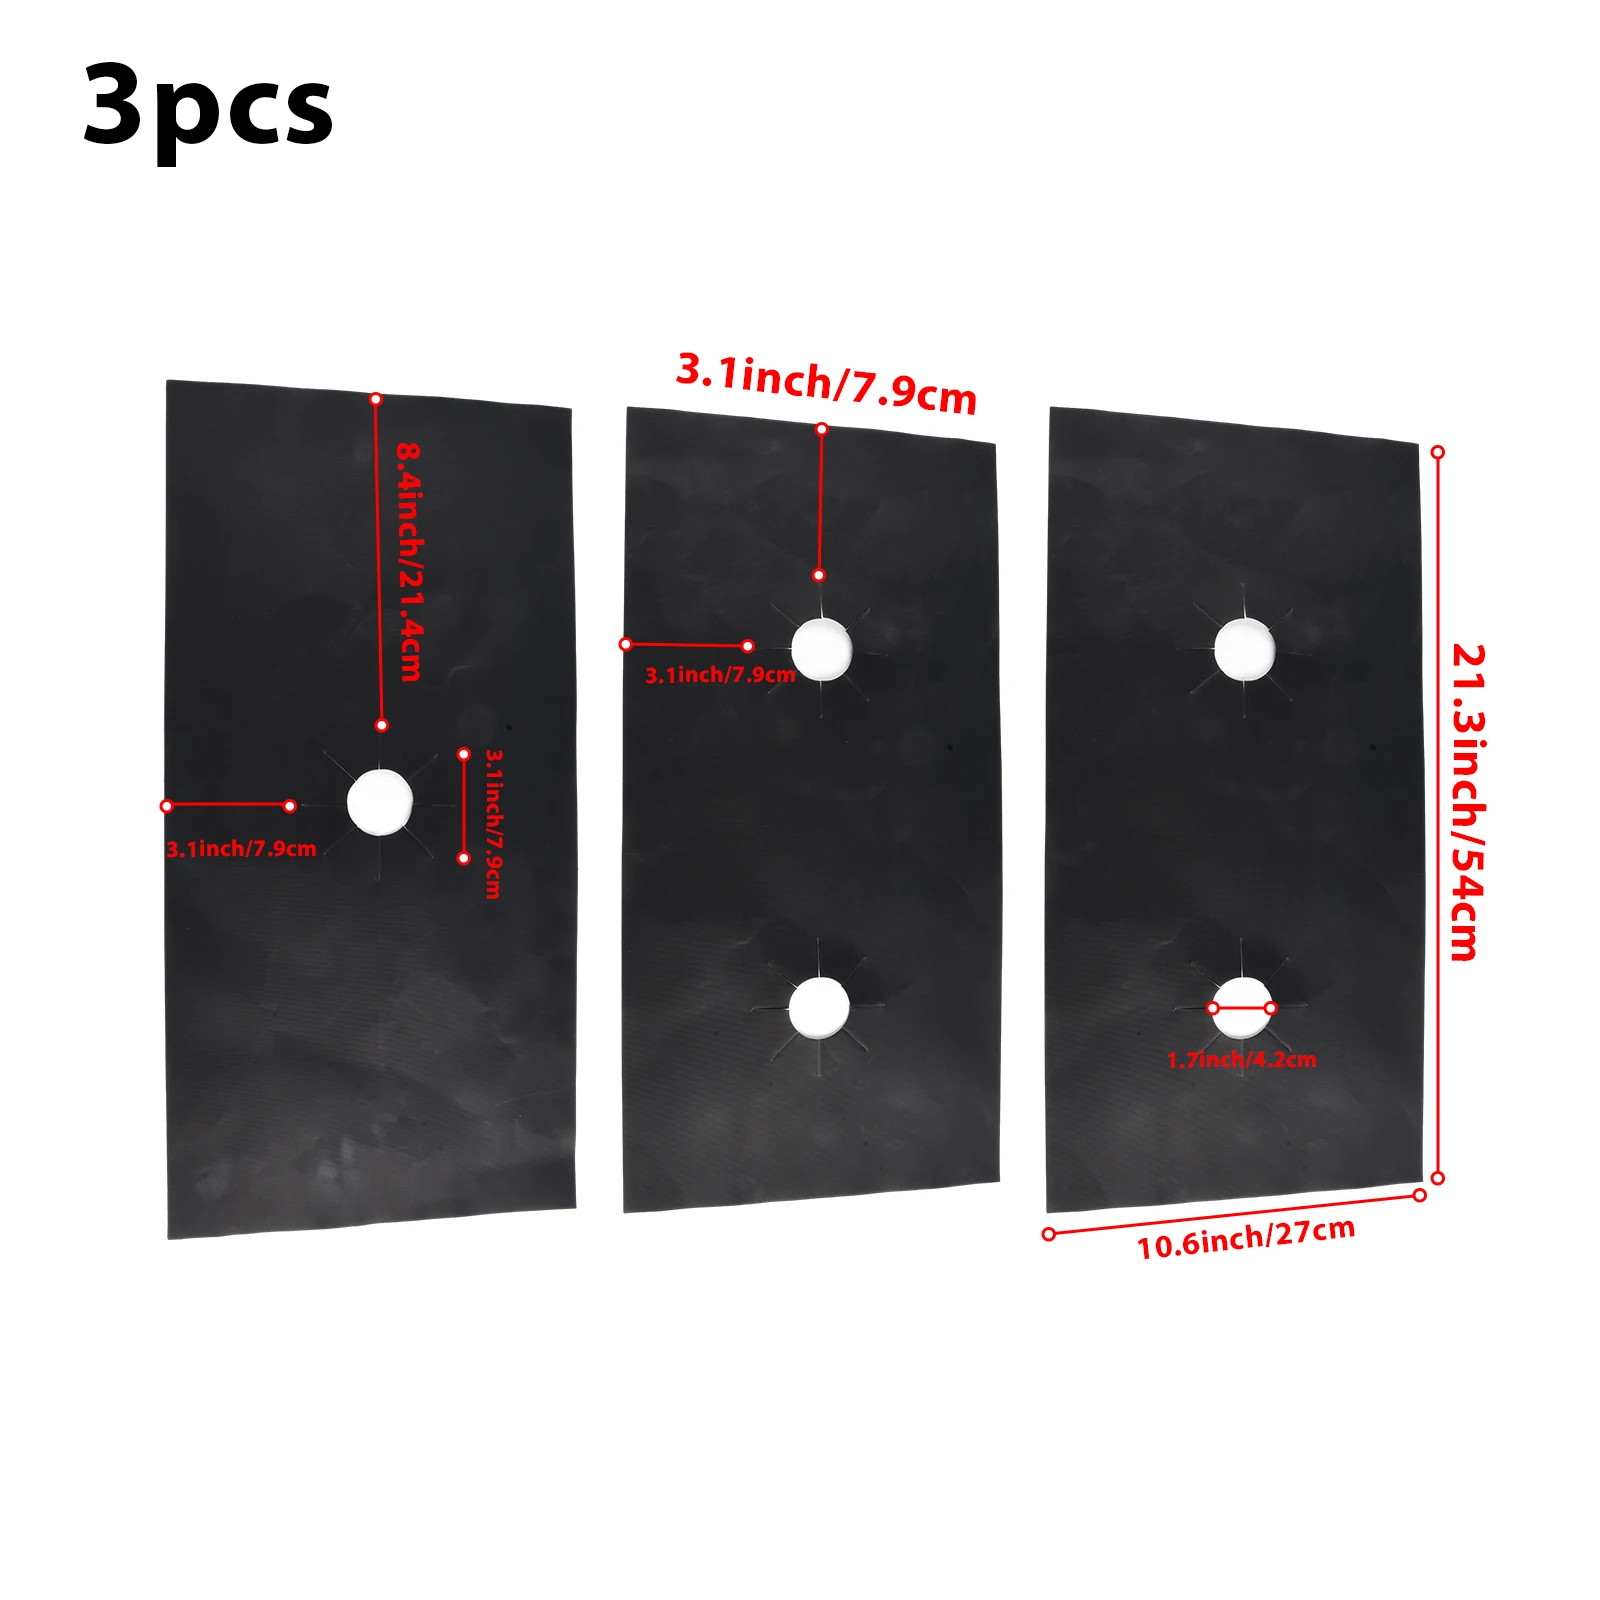 

3pcs/set Gas Stove Protectors Cooker Cover Liner Clean Mat Pad Gas Stove Stovetop Protector For Kitchen Cookware Accessories